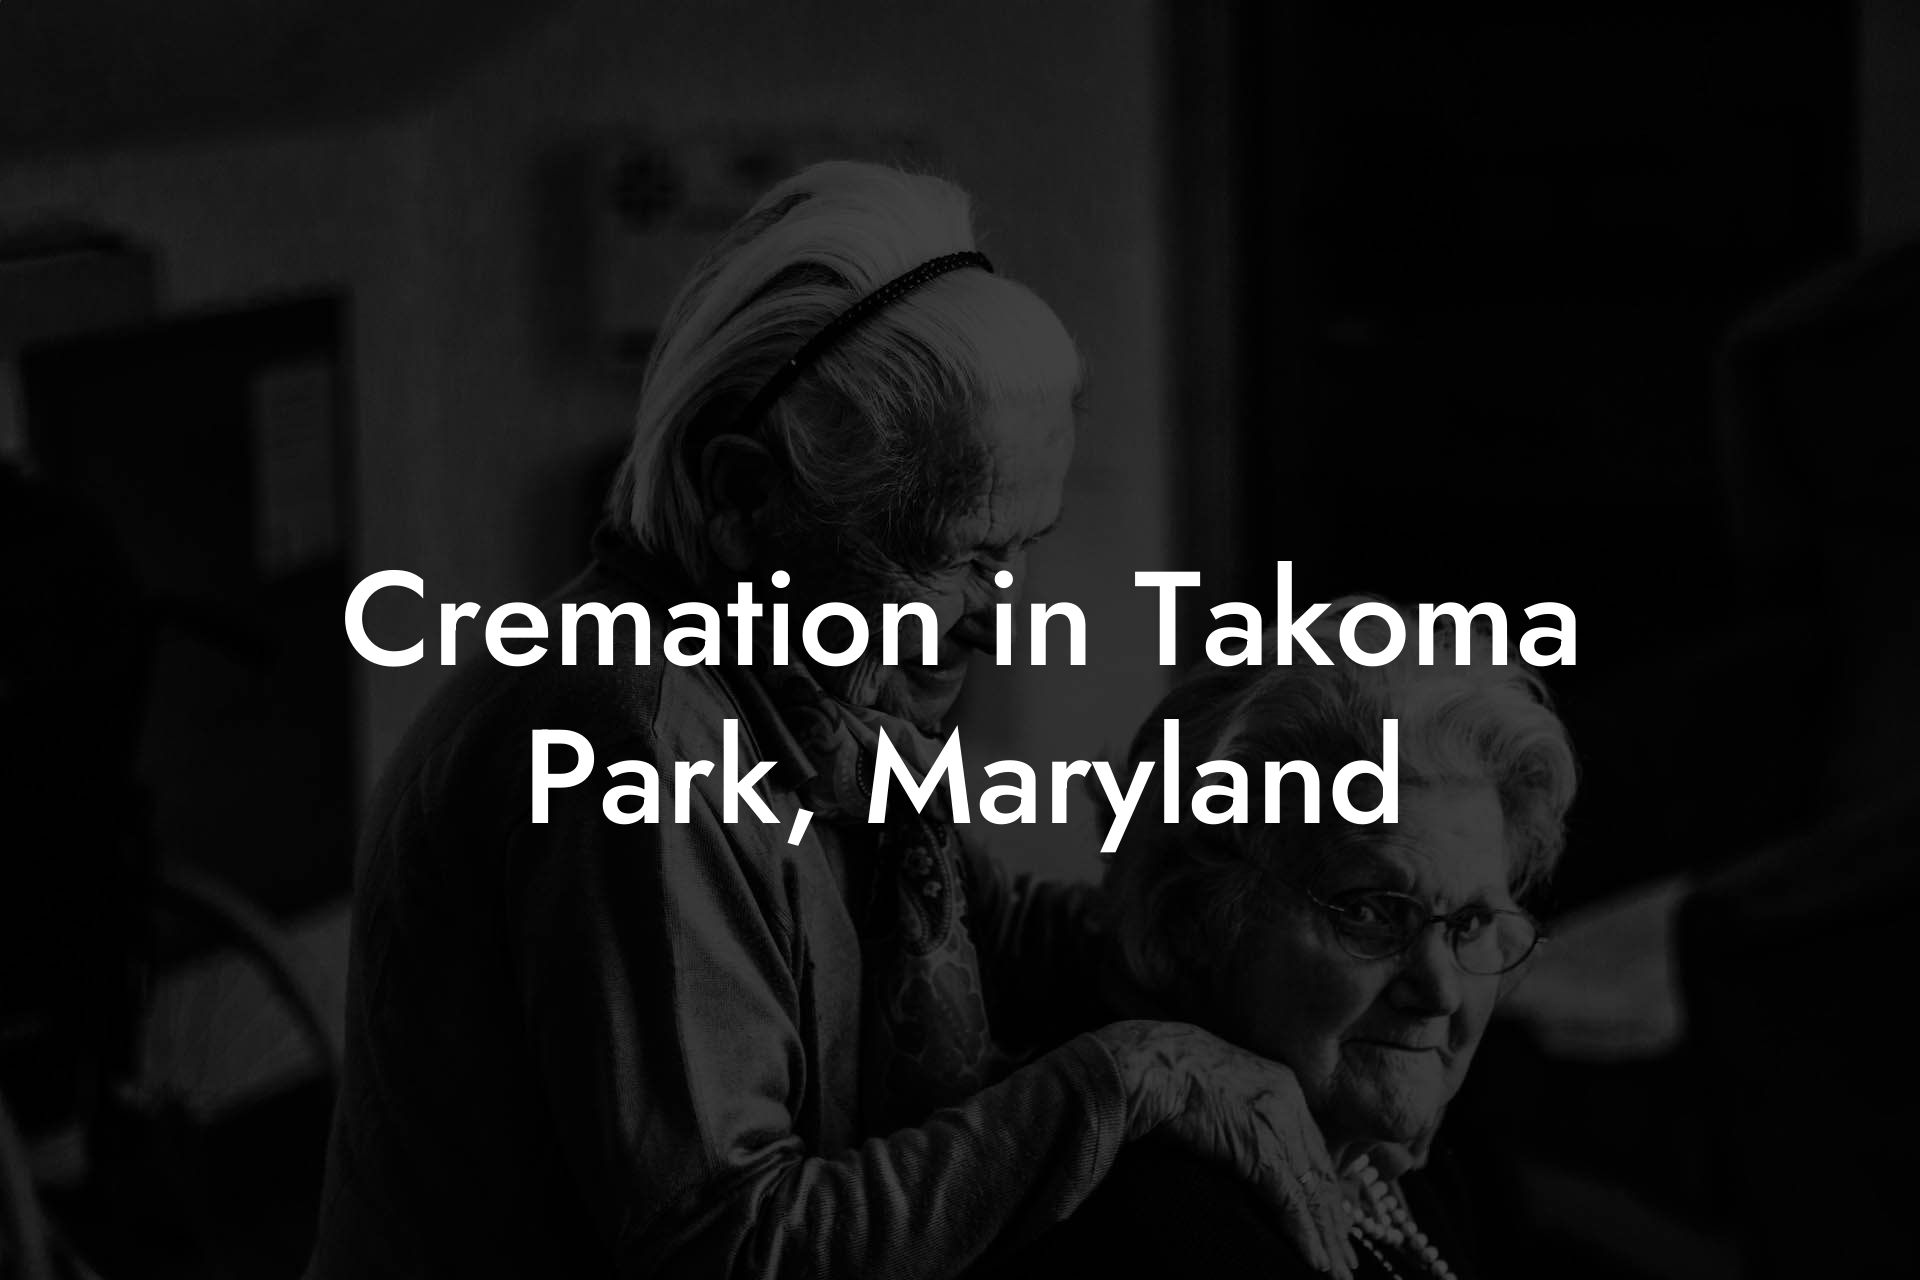 Cremation in Takoma Park, Maryland